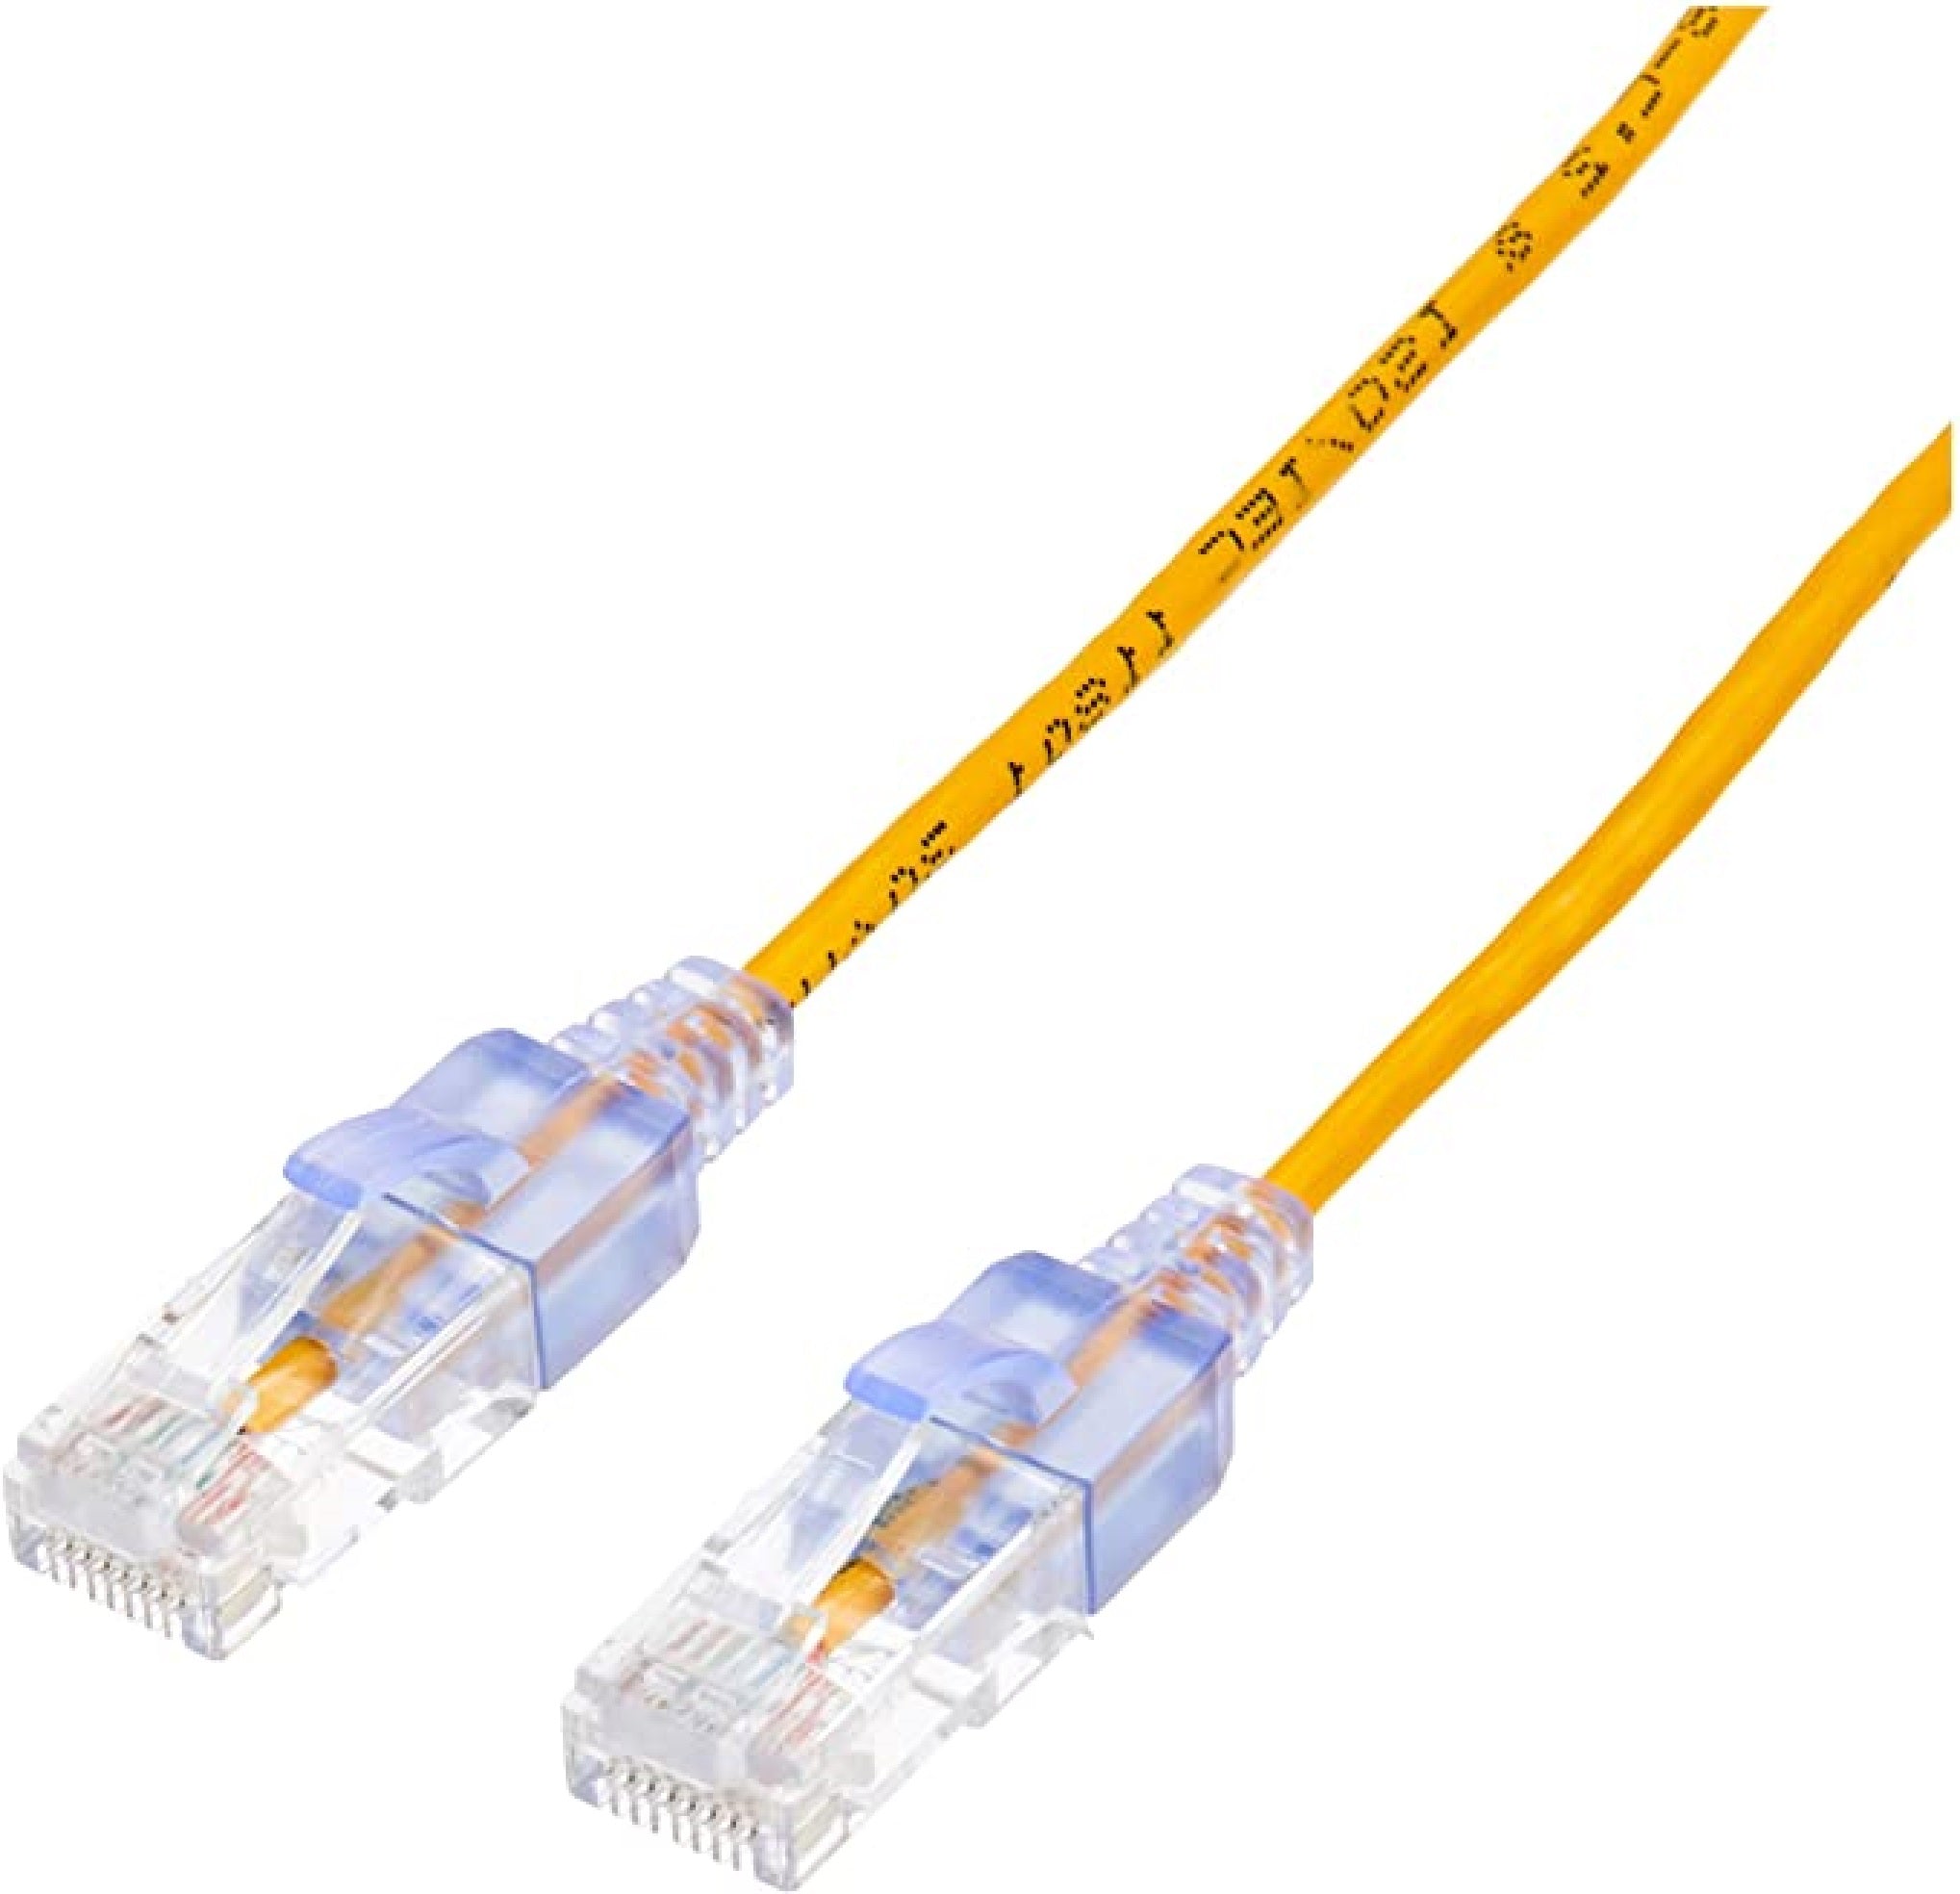 Cat 6 yellow with Rj45